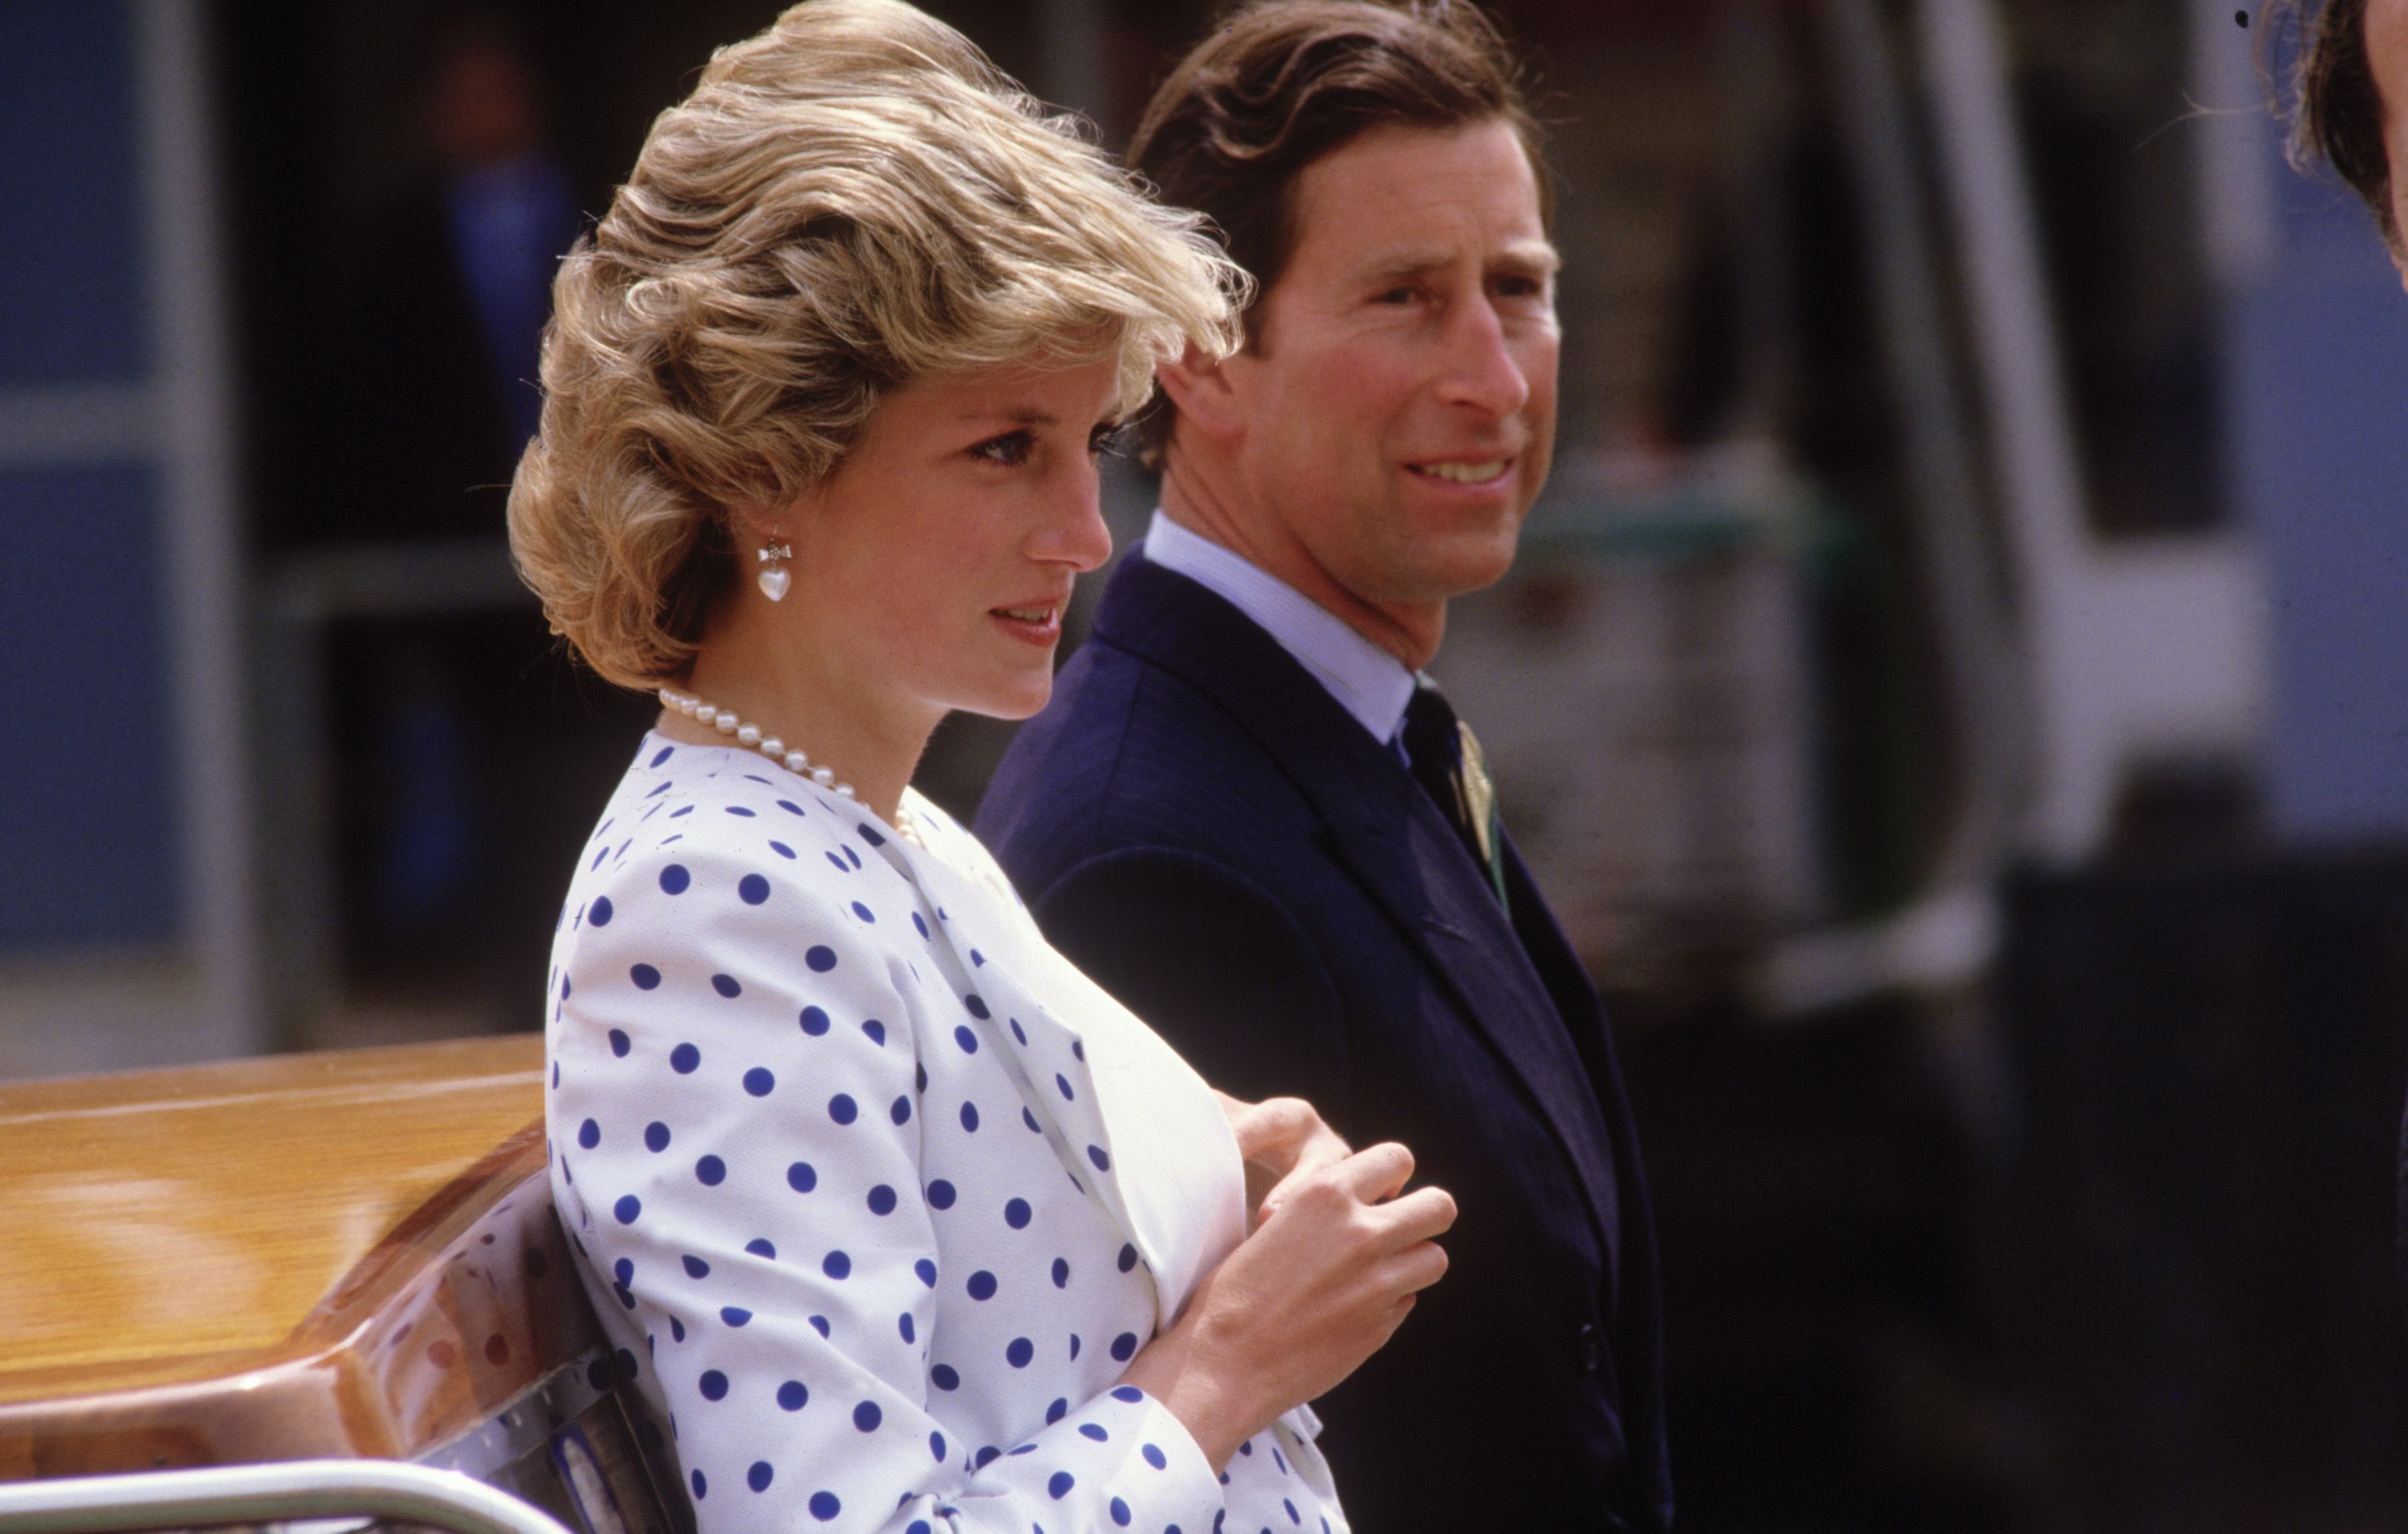 Diana Princess of Wales and Prince Charles travel by motor boat along the Grand Canal in Venice on May 4, 1985 | Photo: Getty Images